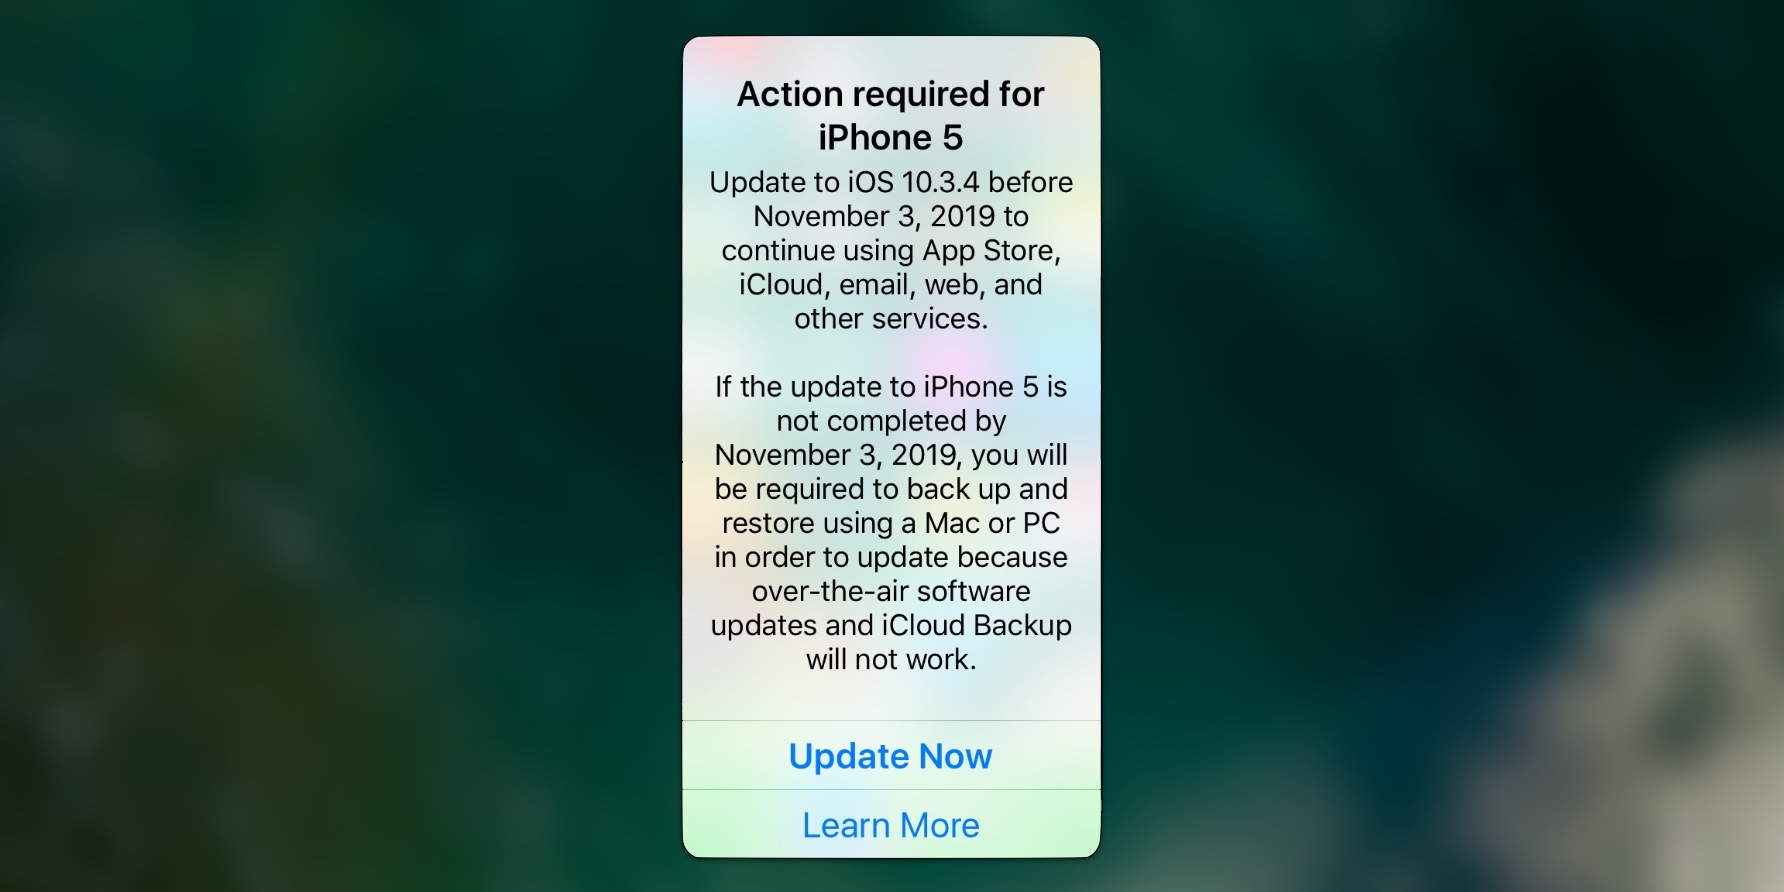 Still using an iPhone 5? iOS 10.3.4 is required to keep your phone working  9to5Mac